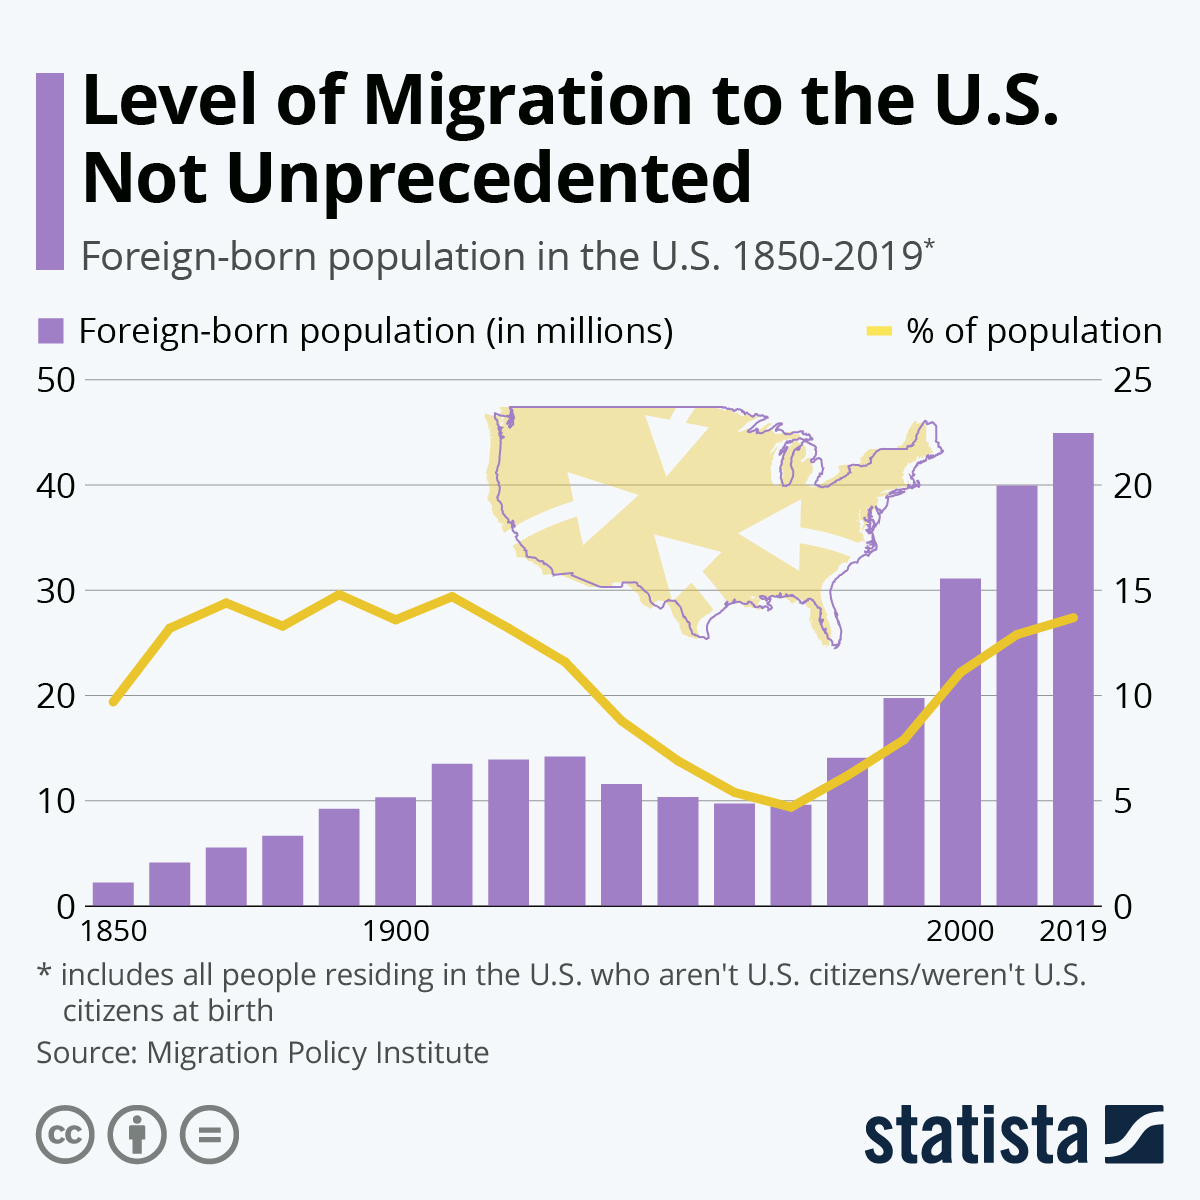 Level of Migration to the U.S. Not Unprecedented